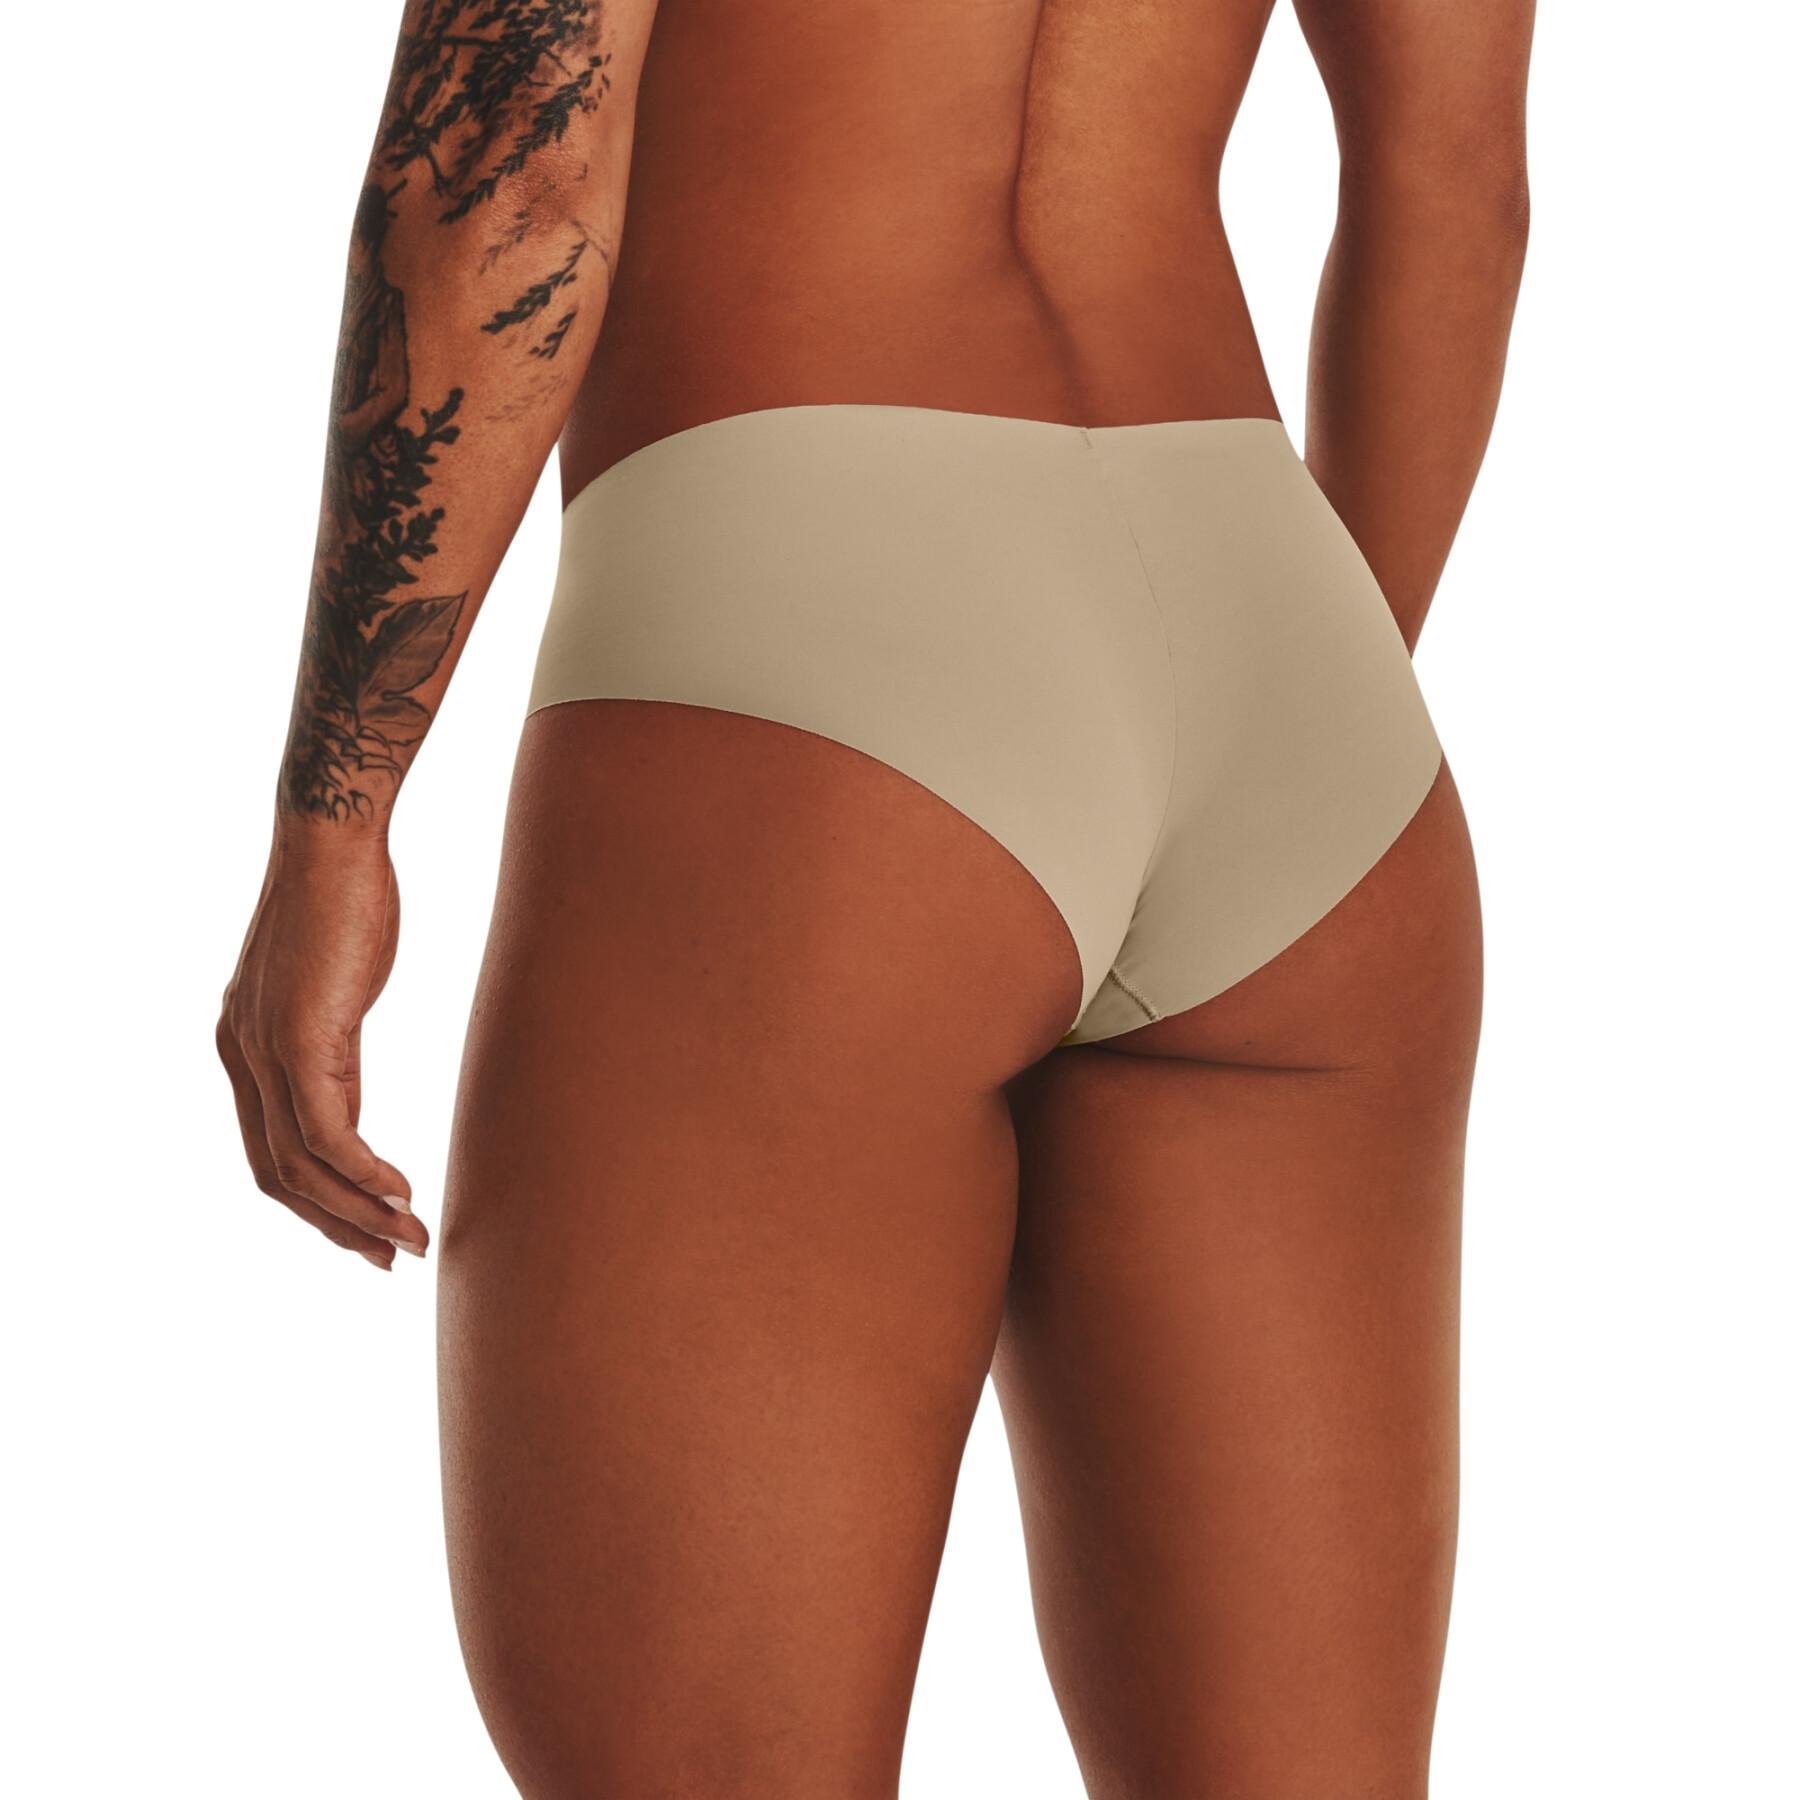 Women's panties Under Armour Pure Stretch (x3)